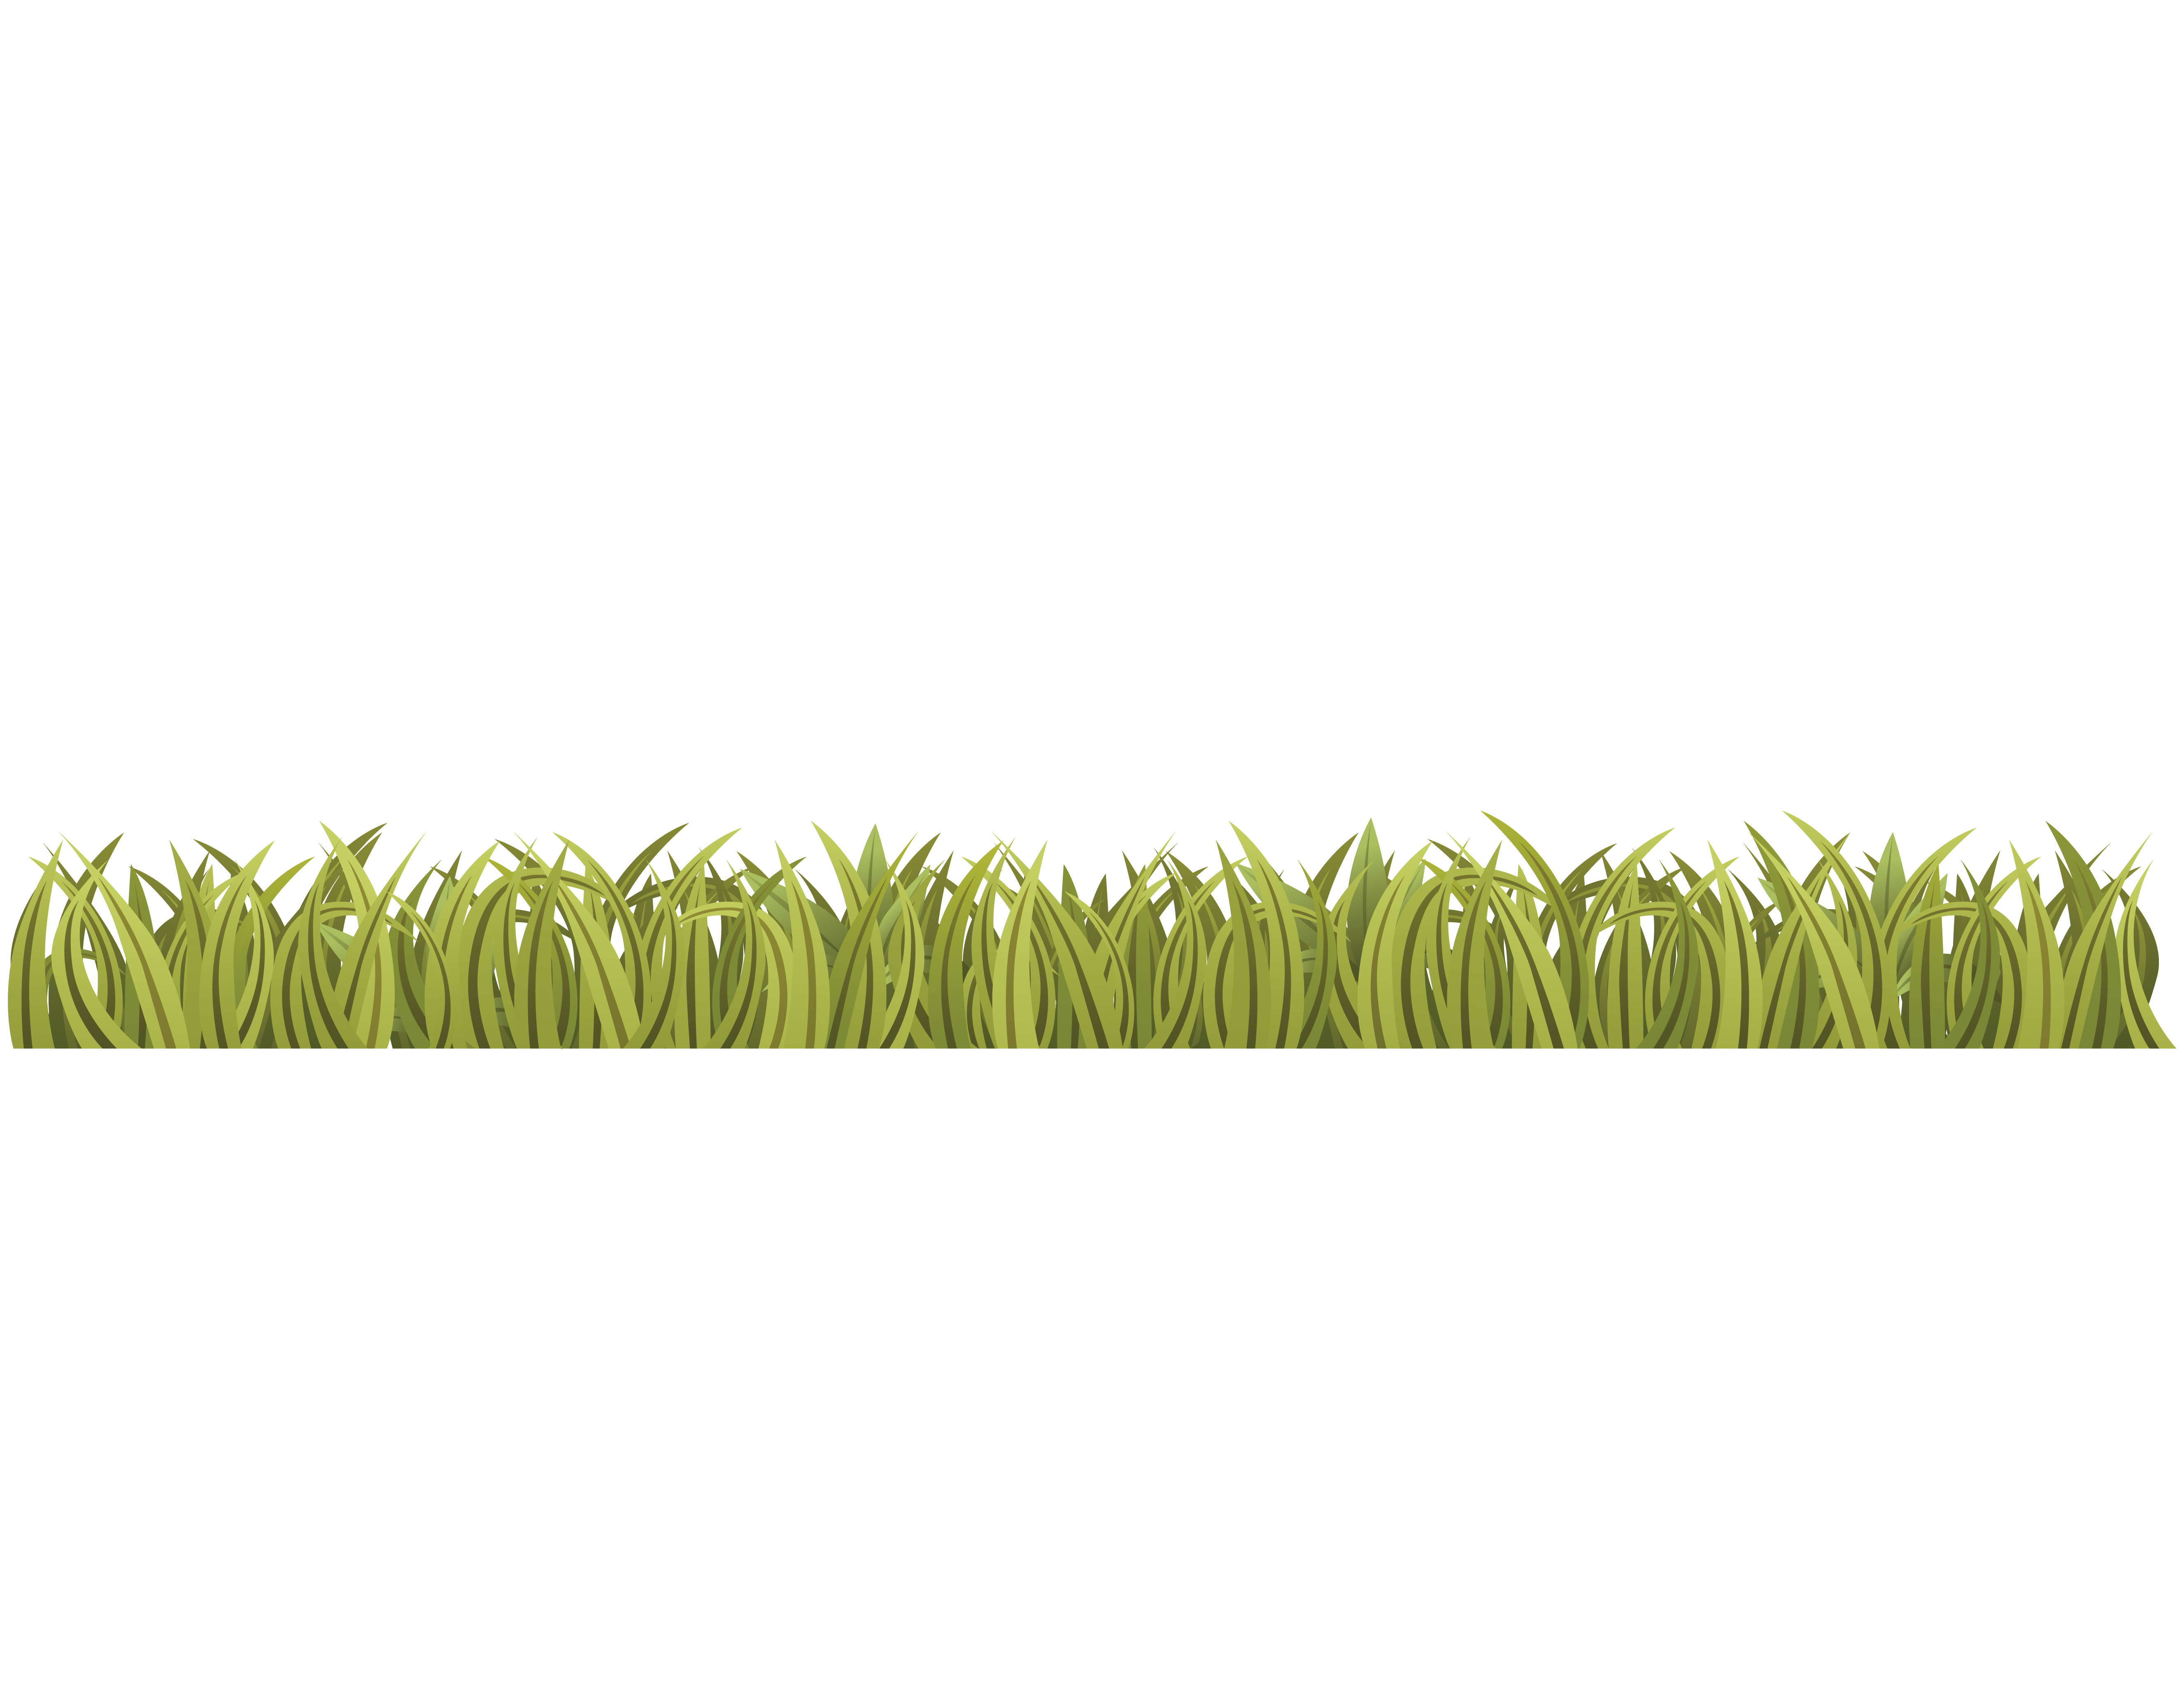 Grass PNG transparent image download, size: 7327x3295px